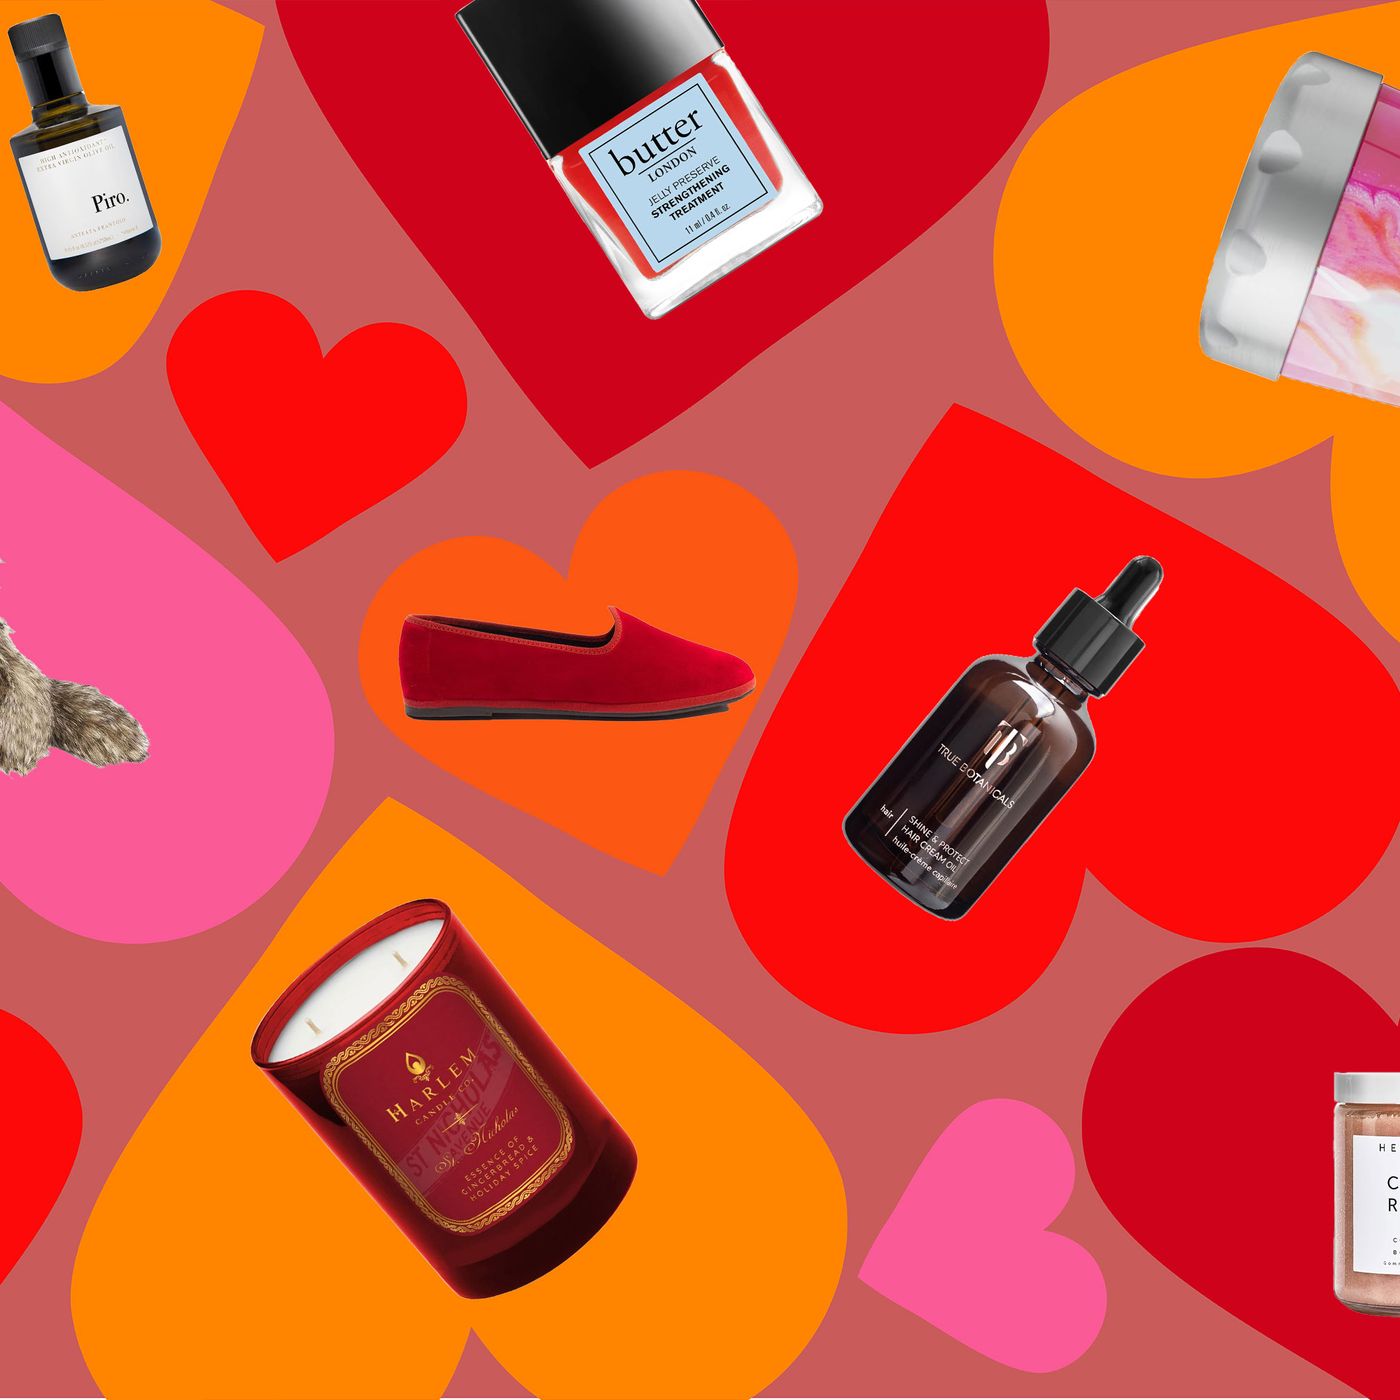 Why We Don't Celebrate Valentine's Day - Sell All Your Stuff